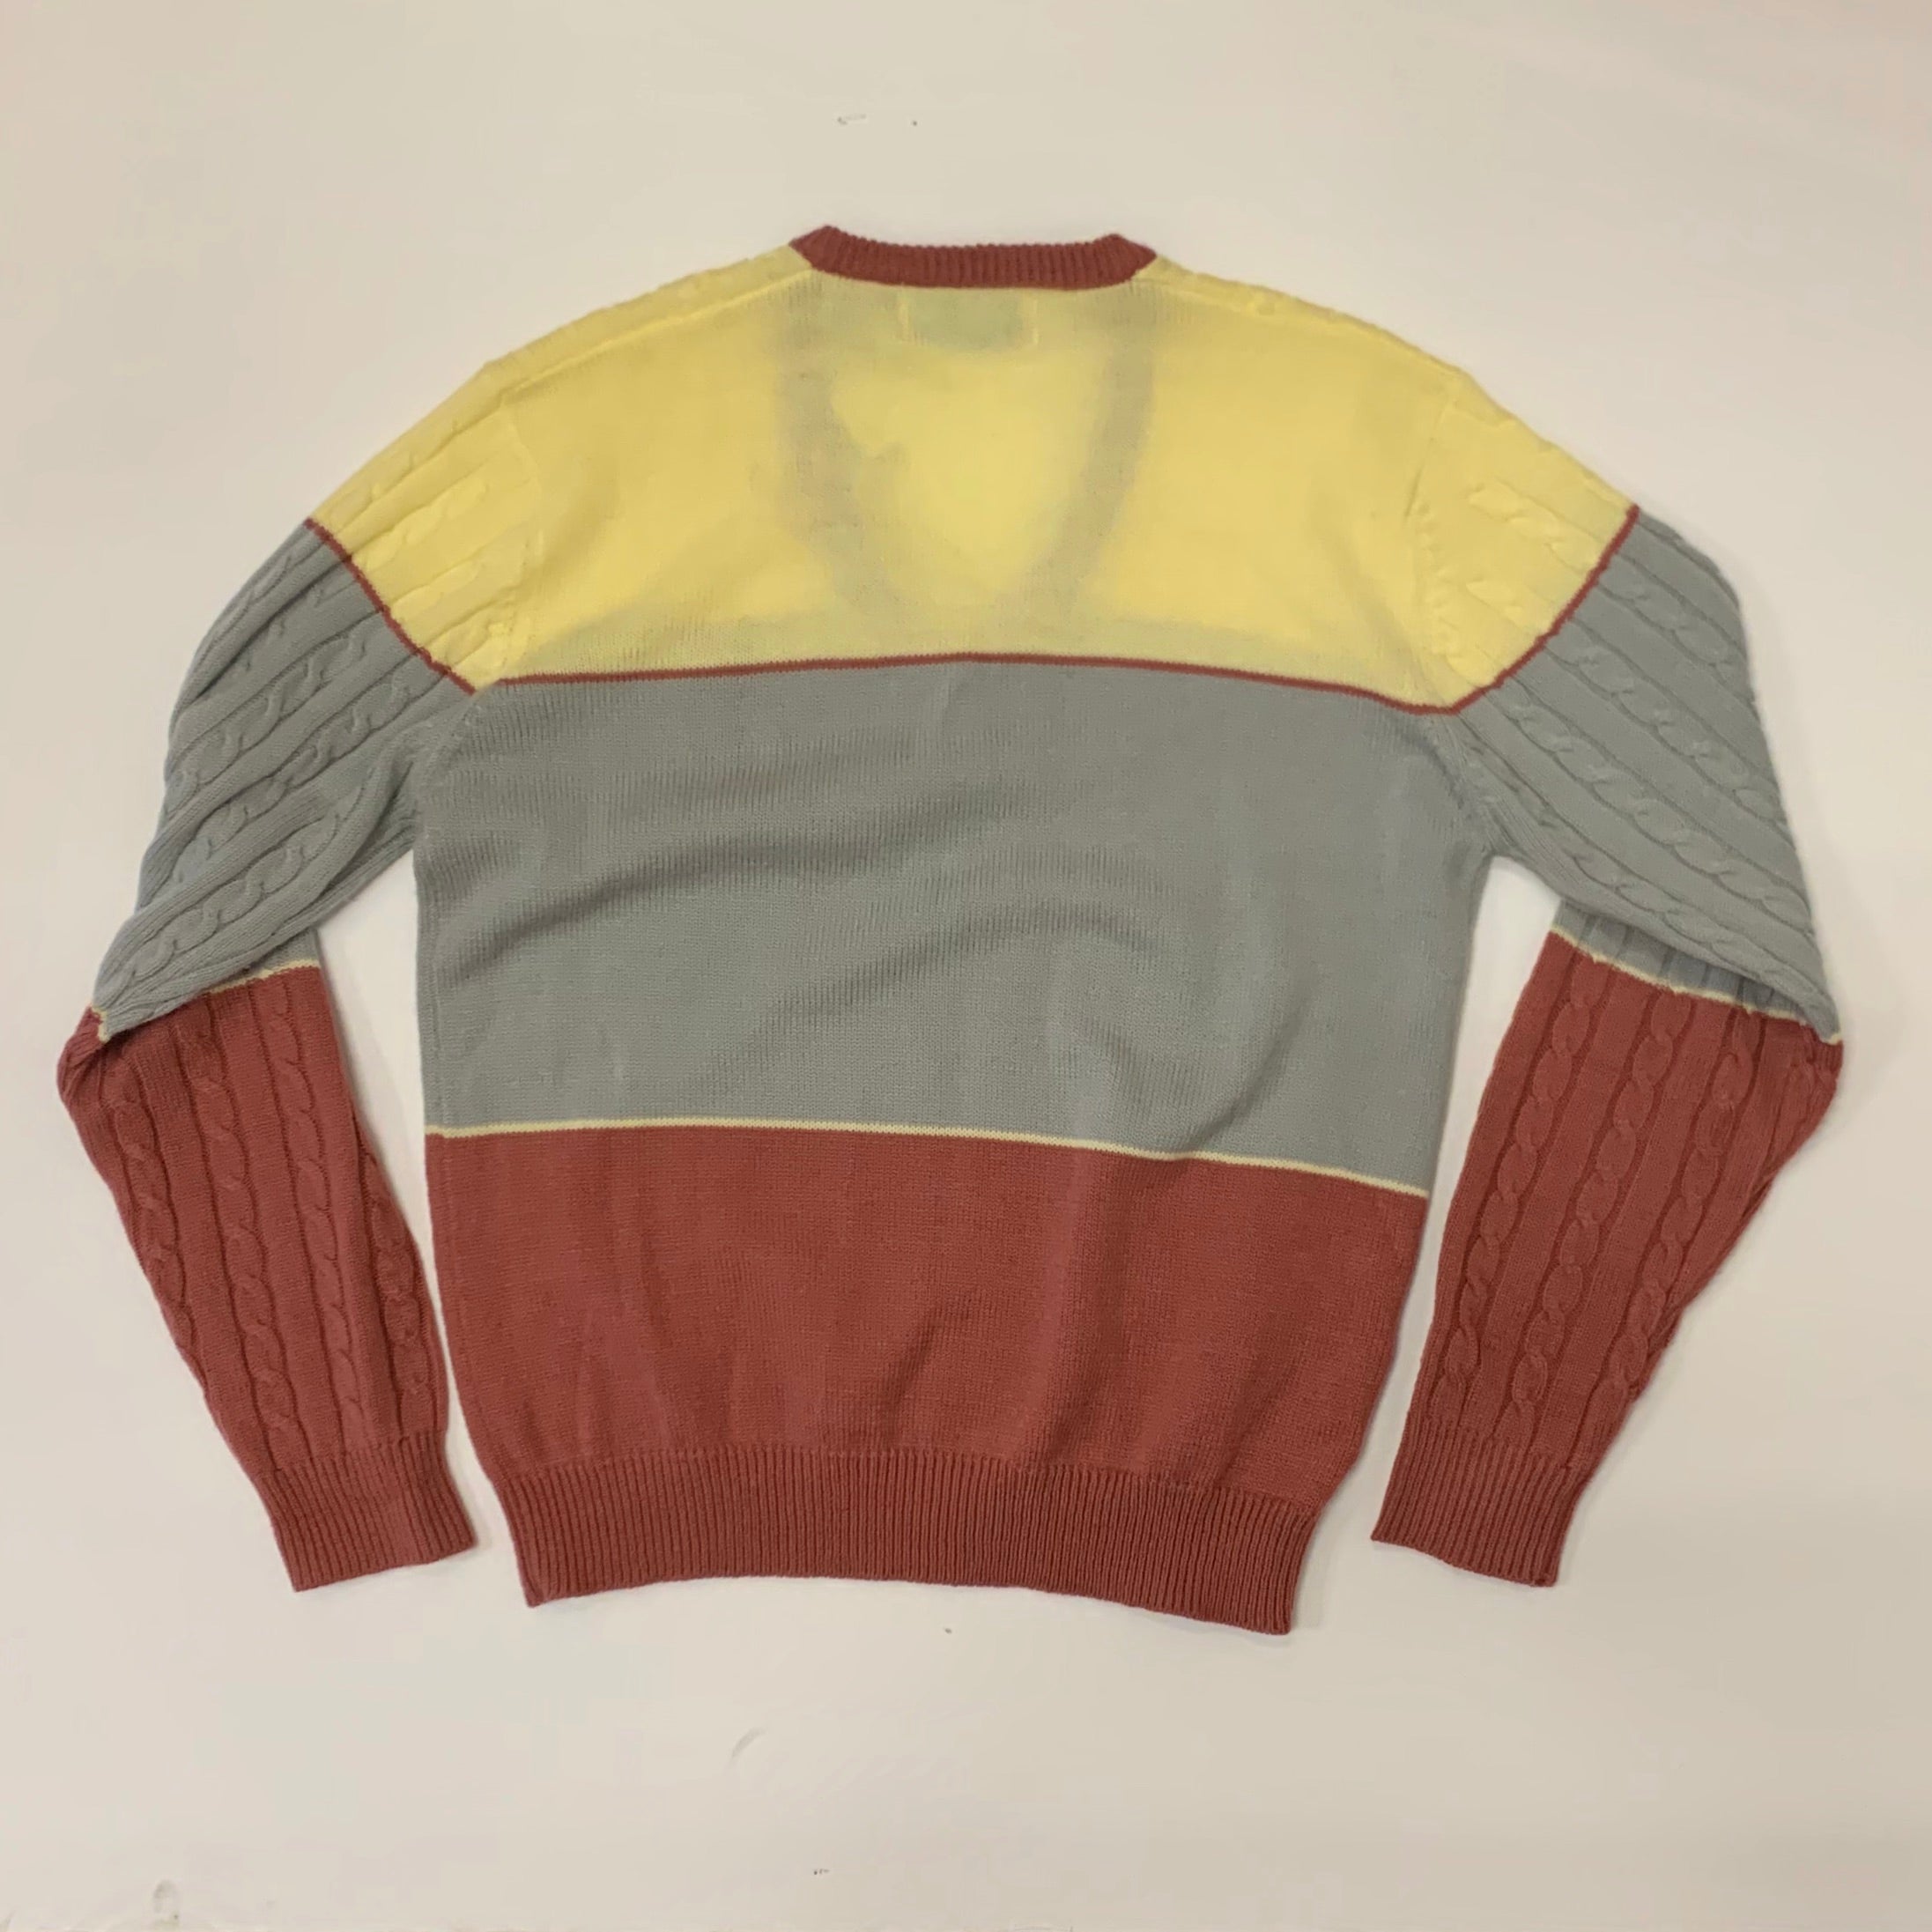 Vintage: 80 s Player s Club V-Neck Cable Knit Sweater